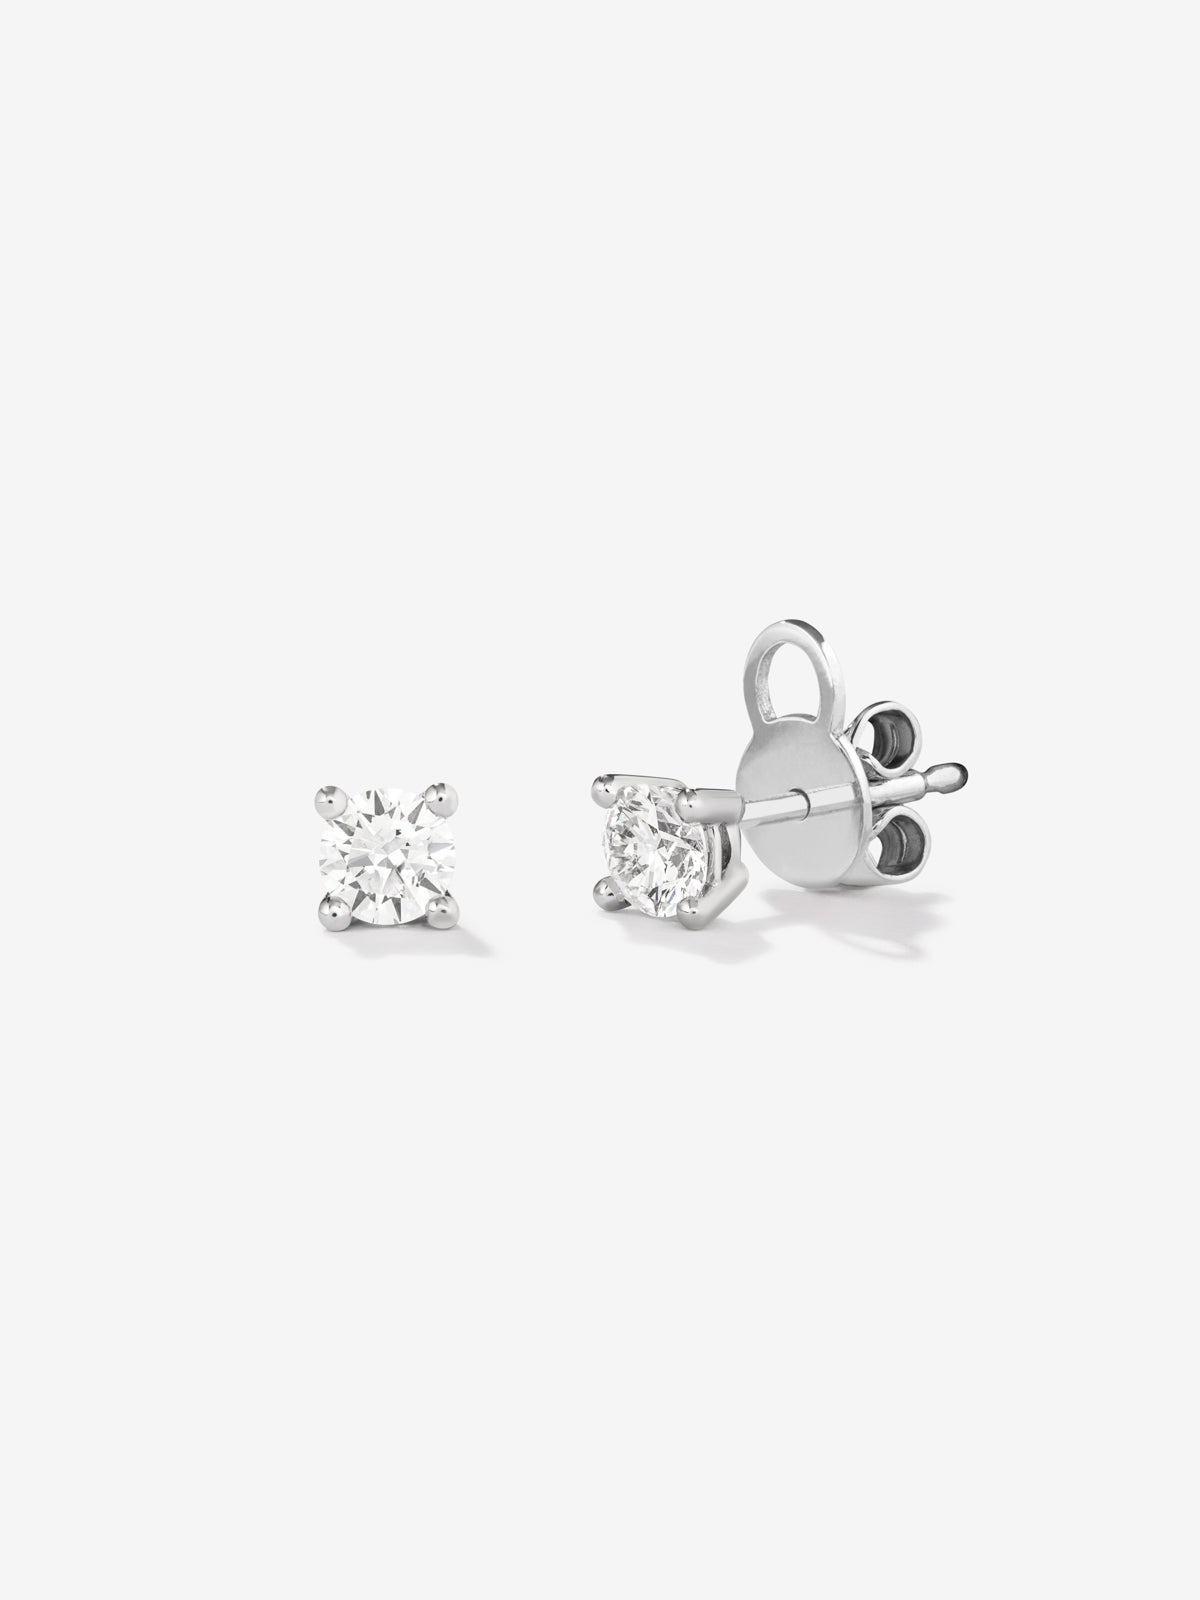 18K white gold solitaire earrings with 2 brilliant-cut diamonds with a total of 0.14 cts